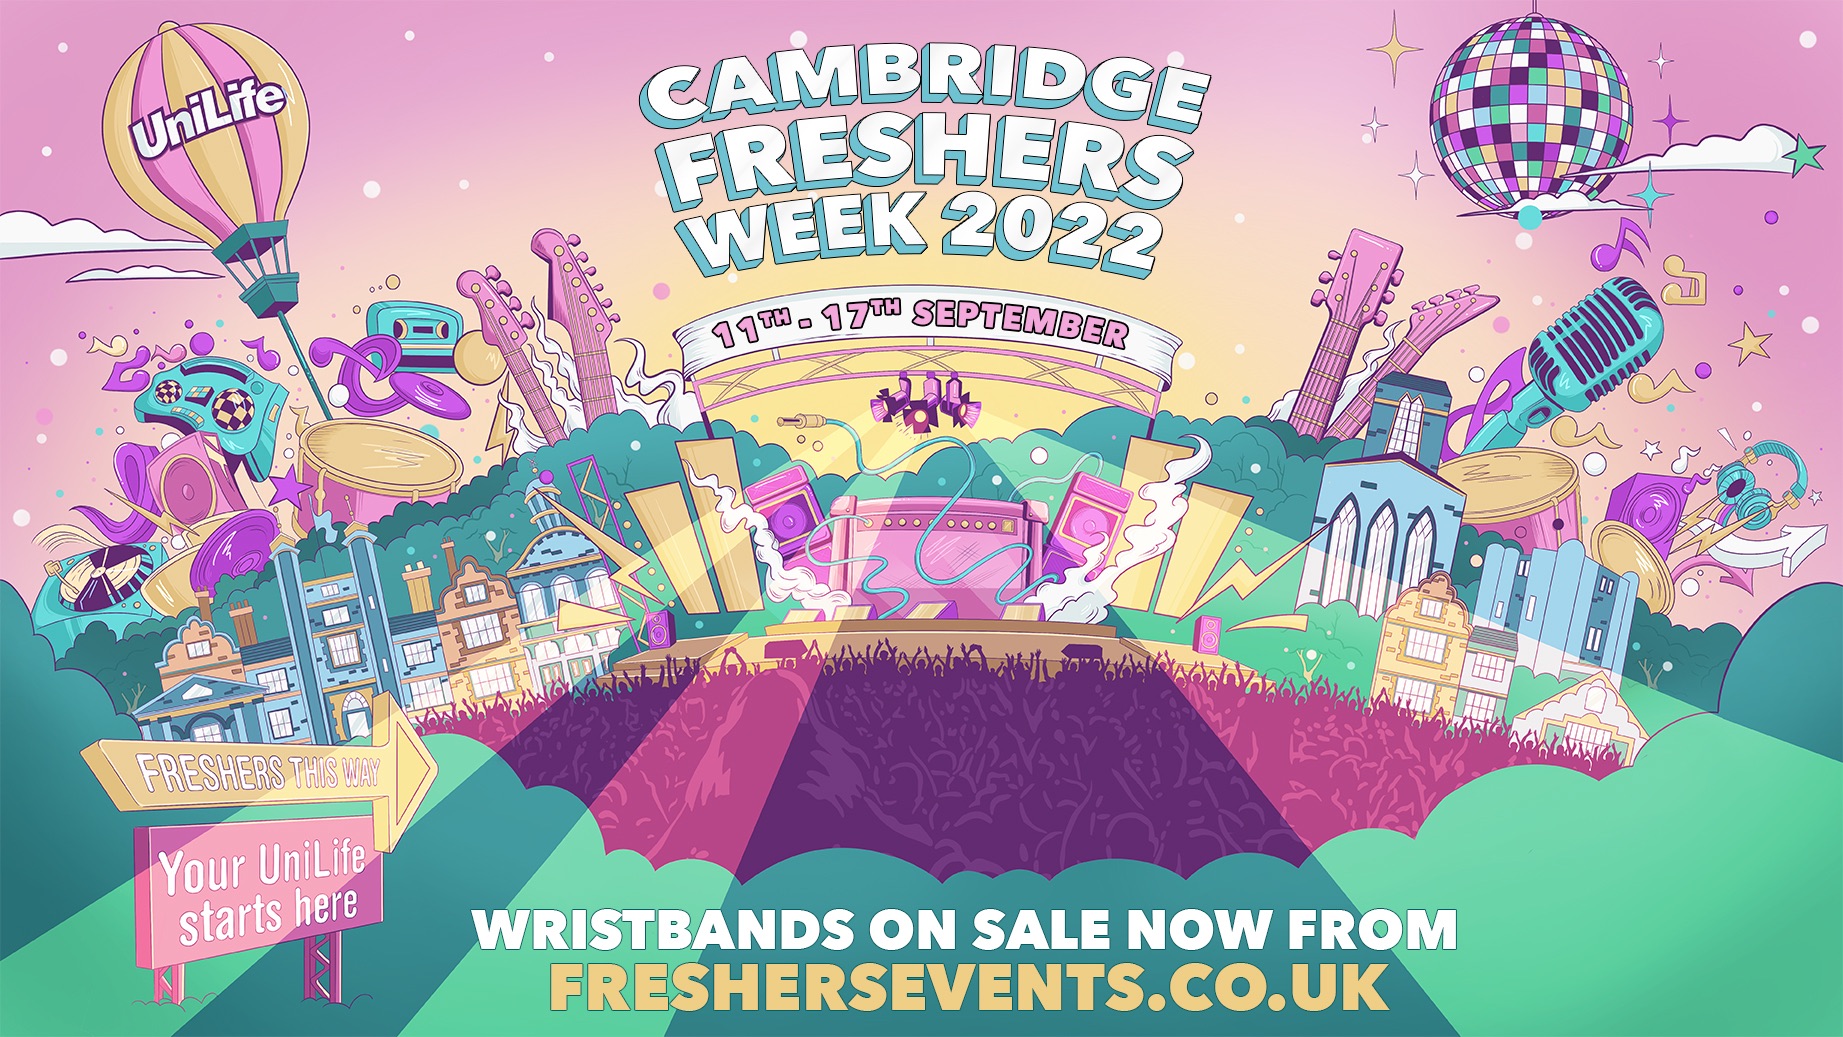 Cambridge Freshers Week 2022 First 100 Wristbands only £10 at